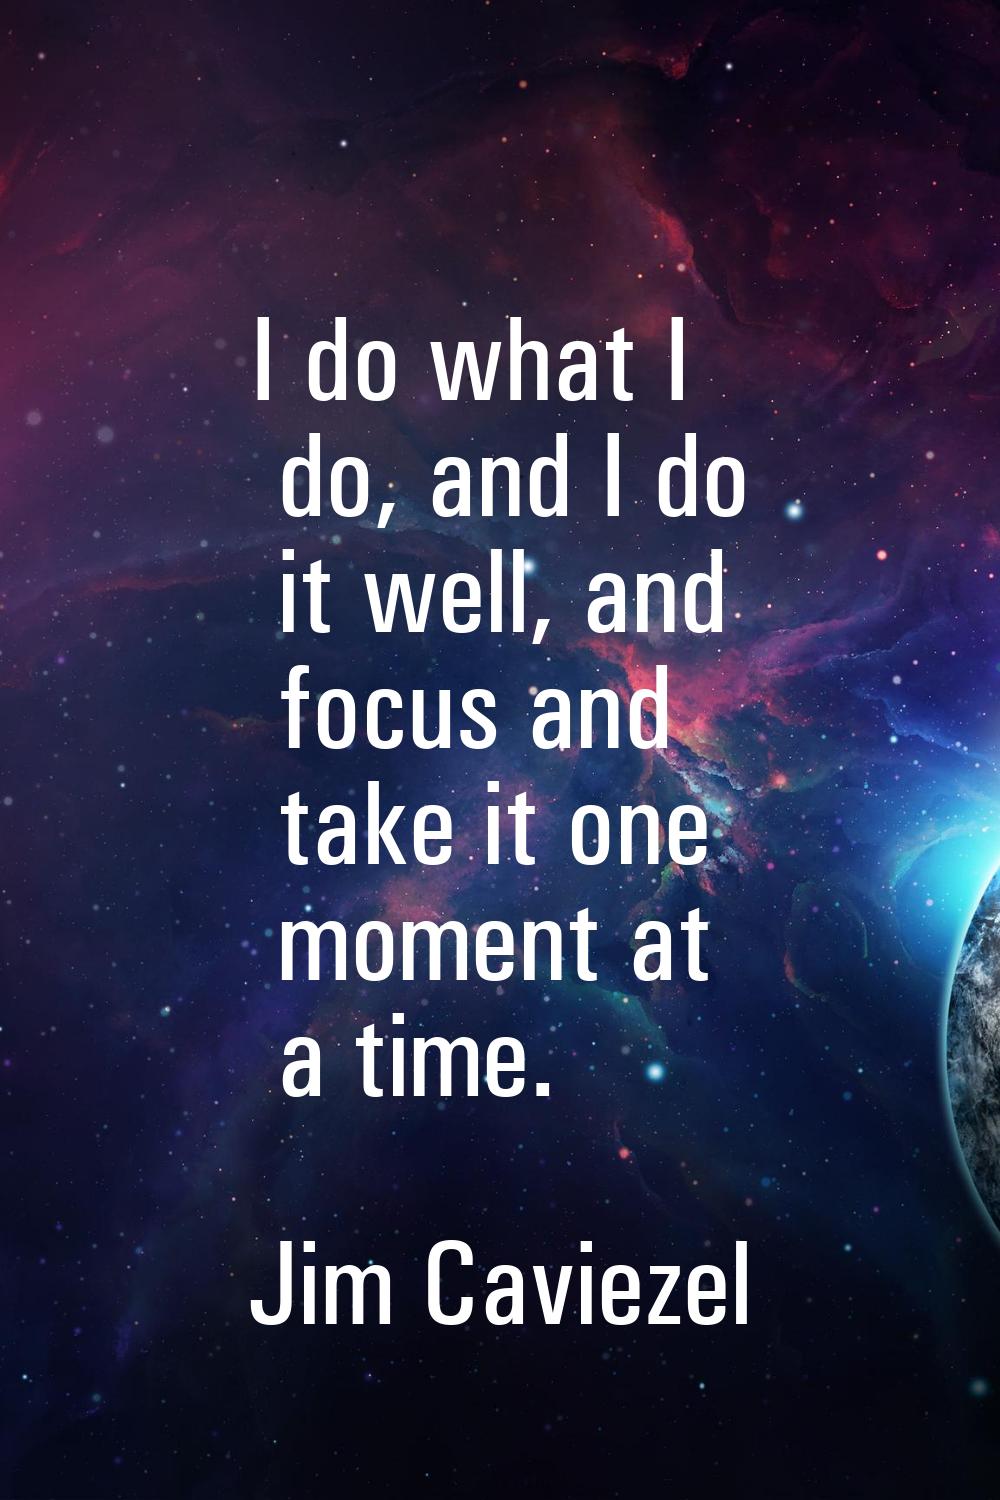 I do what I do, and I do it well, and focus and take it one moment at a time.